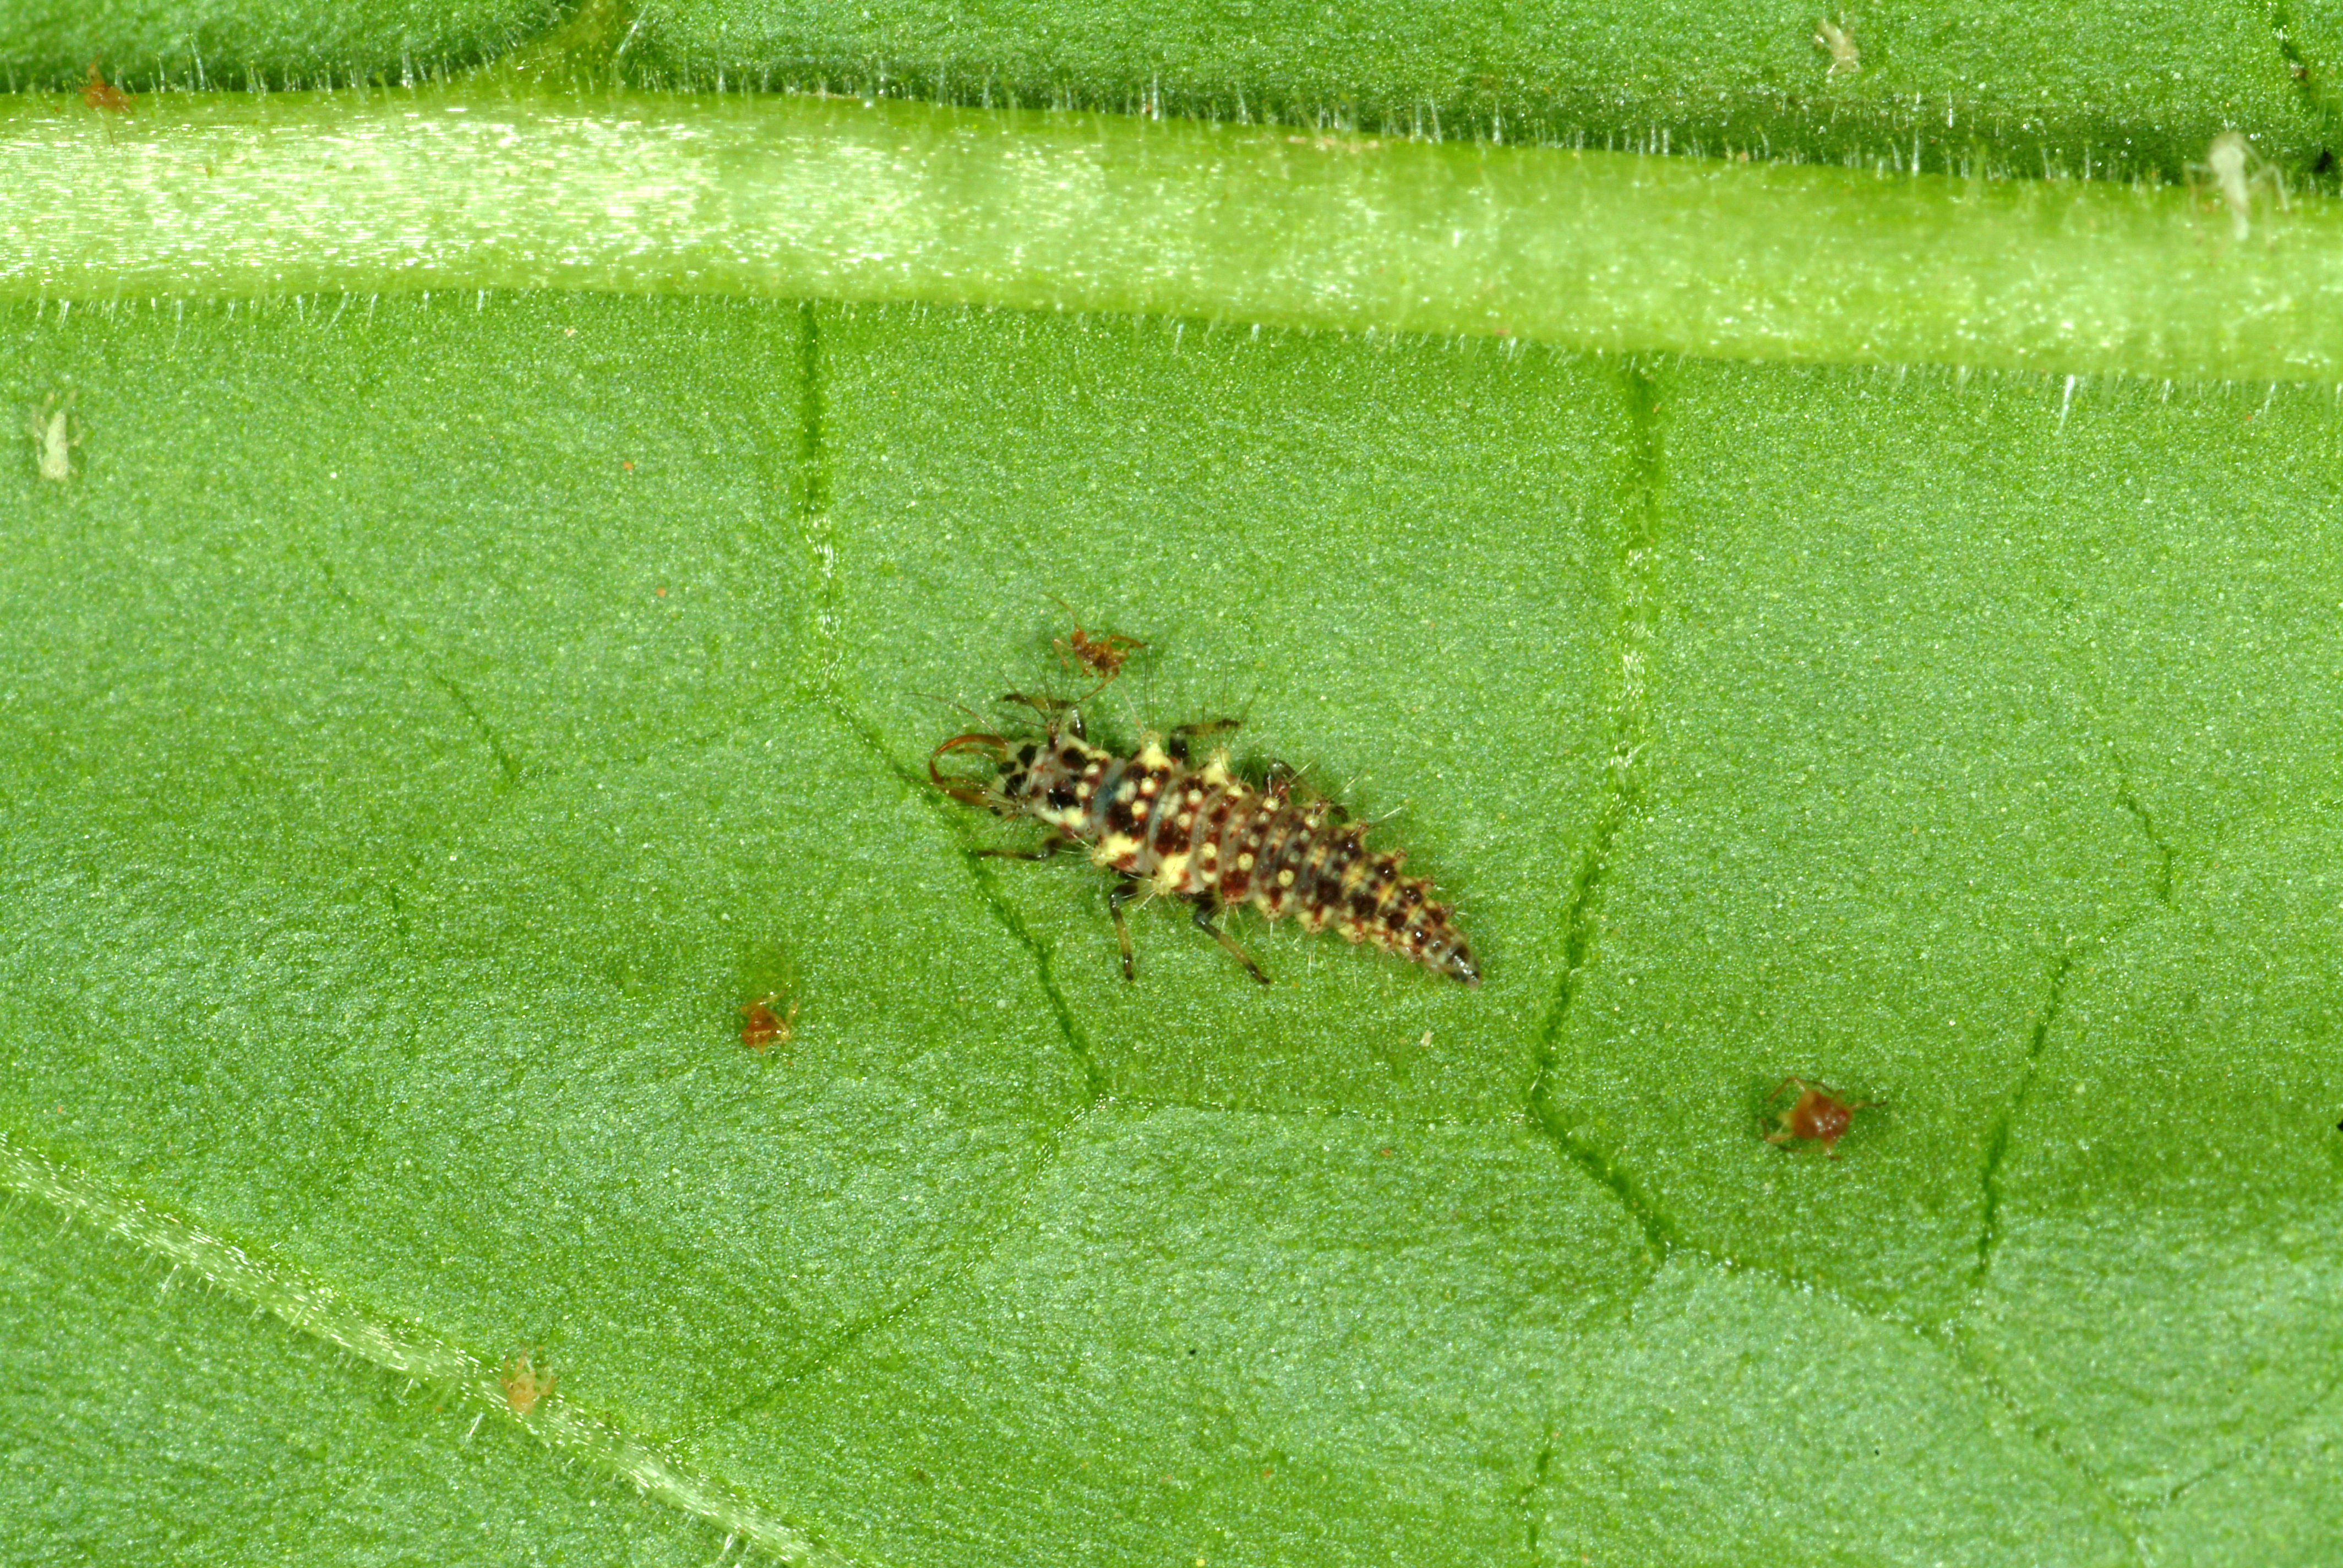 Lacewing larvae use large sickle shaped mouth parts to feed on aphids.